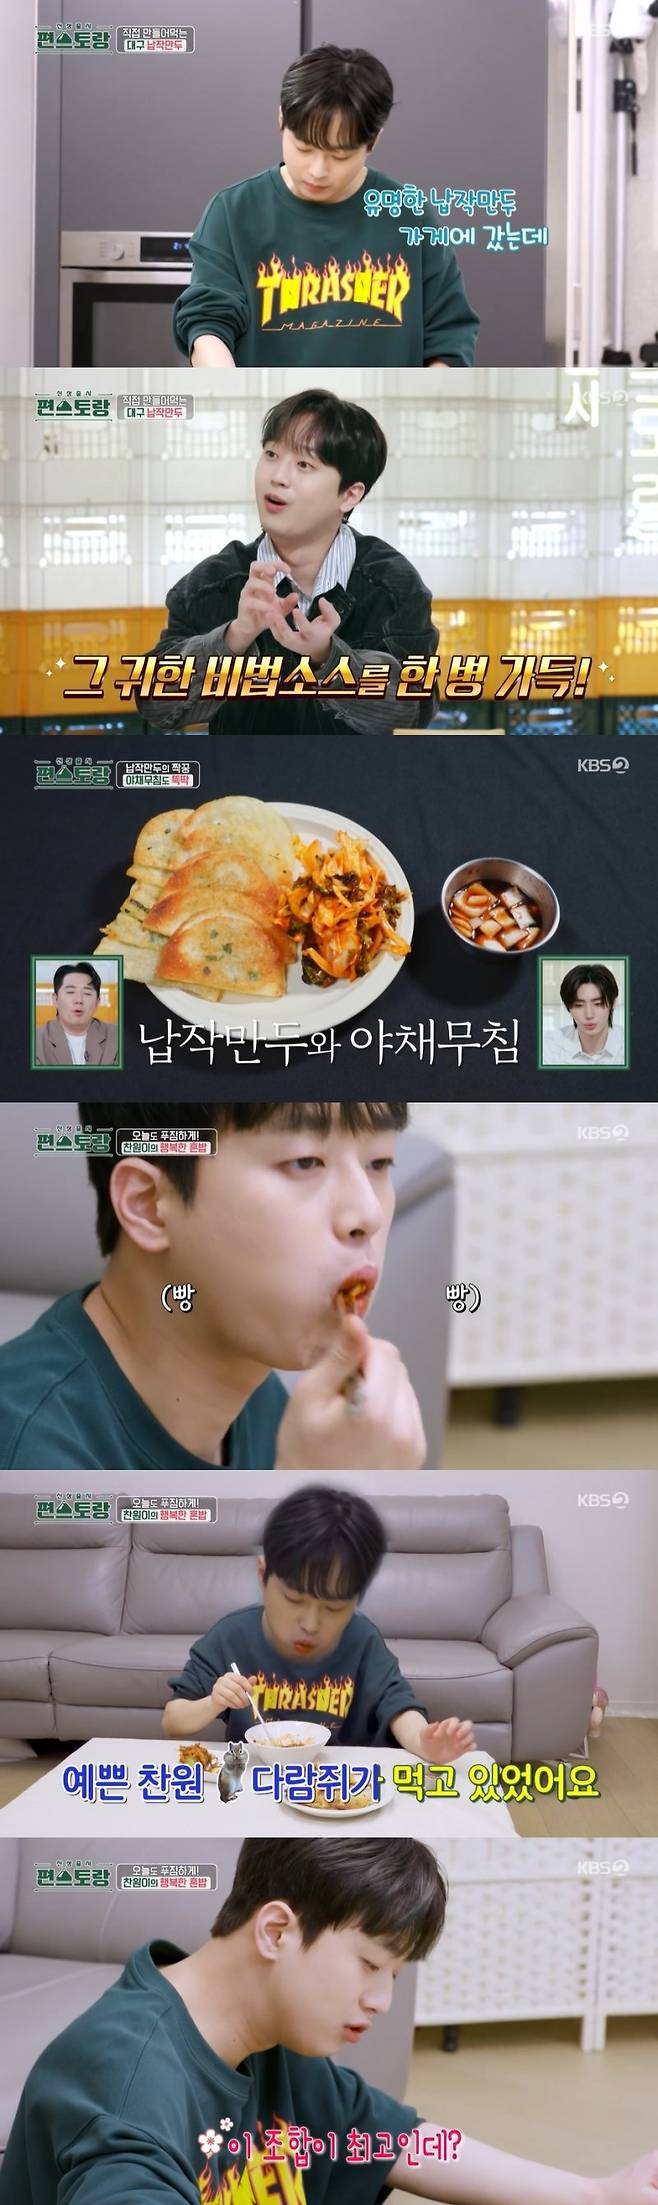 On the 23rd, KBS 2TV  ⁇ StarsStars Top Recipe at Fun-Staurant  (abbreviated  ⁇ StarsStars Top Recipe at Fun-Staurant ) recorded TV viewer ratings of 4.3% (Nielsen Korea, nationwide households).On this day, Ryu Soo-young, Cha Ye-ryun, and Lee Chan-won presented the delicacies to blow the heat in one room.Among them, Lee Chan-won made a variety of side dishes using his favorite Cucumber. I liked it so much that I started to cook Cucumber from the age of 18 when I was a high school student.Lee Chan-won did not stop here, but made bibim noodles with cucumber paper and cod-flavored dumplings.Among them, Lee Chan-won cooked five flat dumplings, which were made by putting a little bit of seasoned vermicelli and leek directly on the dumplings, and frying them in oil.Lee Chan-wons happy rice bowl was completed.On the other hand, Ryu Soo-youngs diet sandwich and white cold noodle recipe were revealed.Cha Ye-ryun invited her best friend Jin Seo-yeon to her home and presented a Jin Seo-yeon customized health cooking parade.